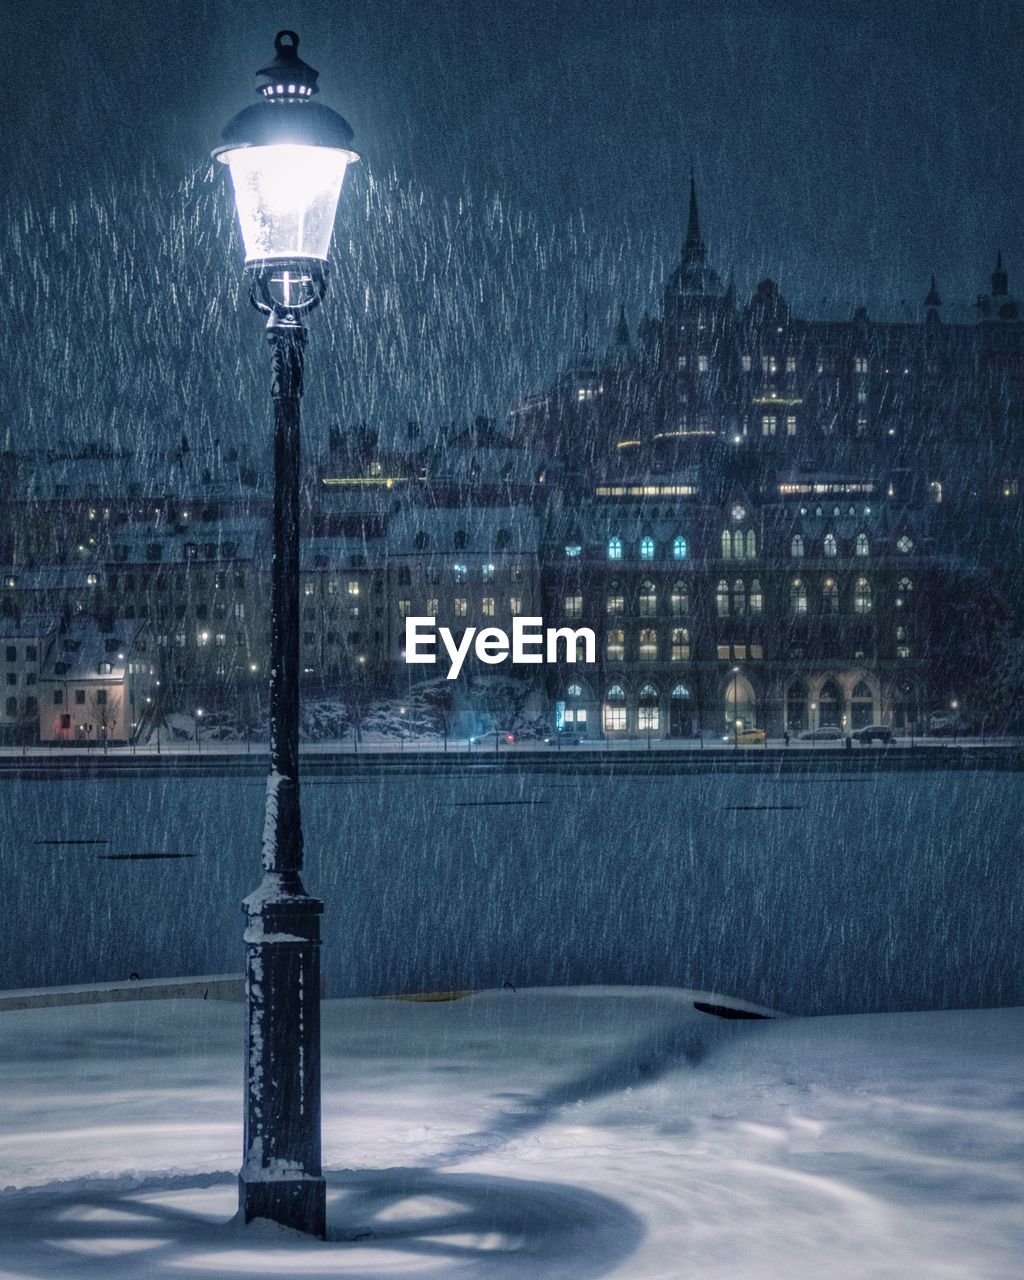 Snowfall over stockholm with old street lamp in foreground